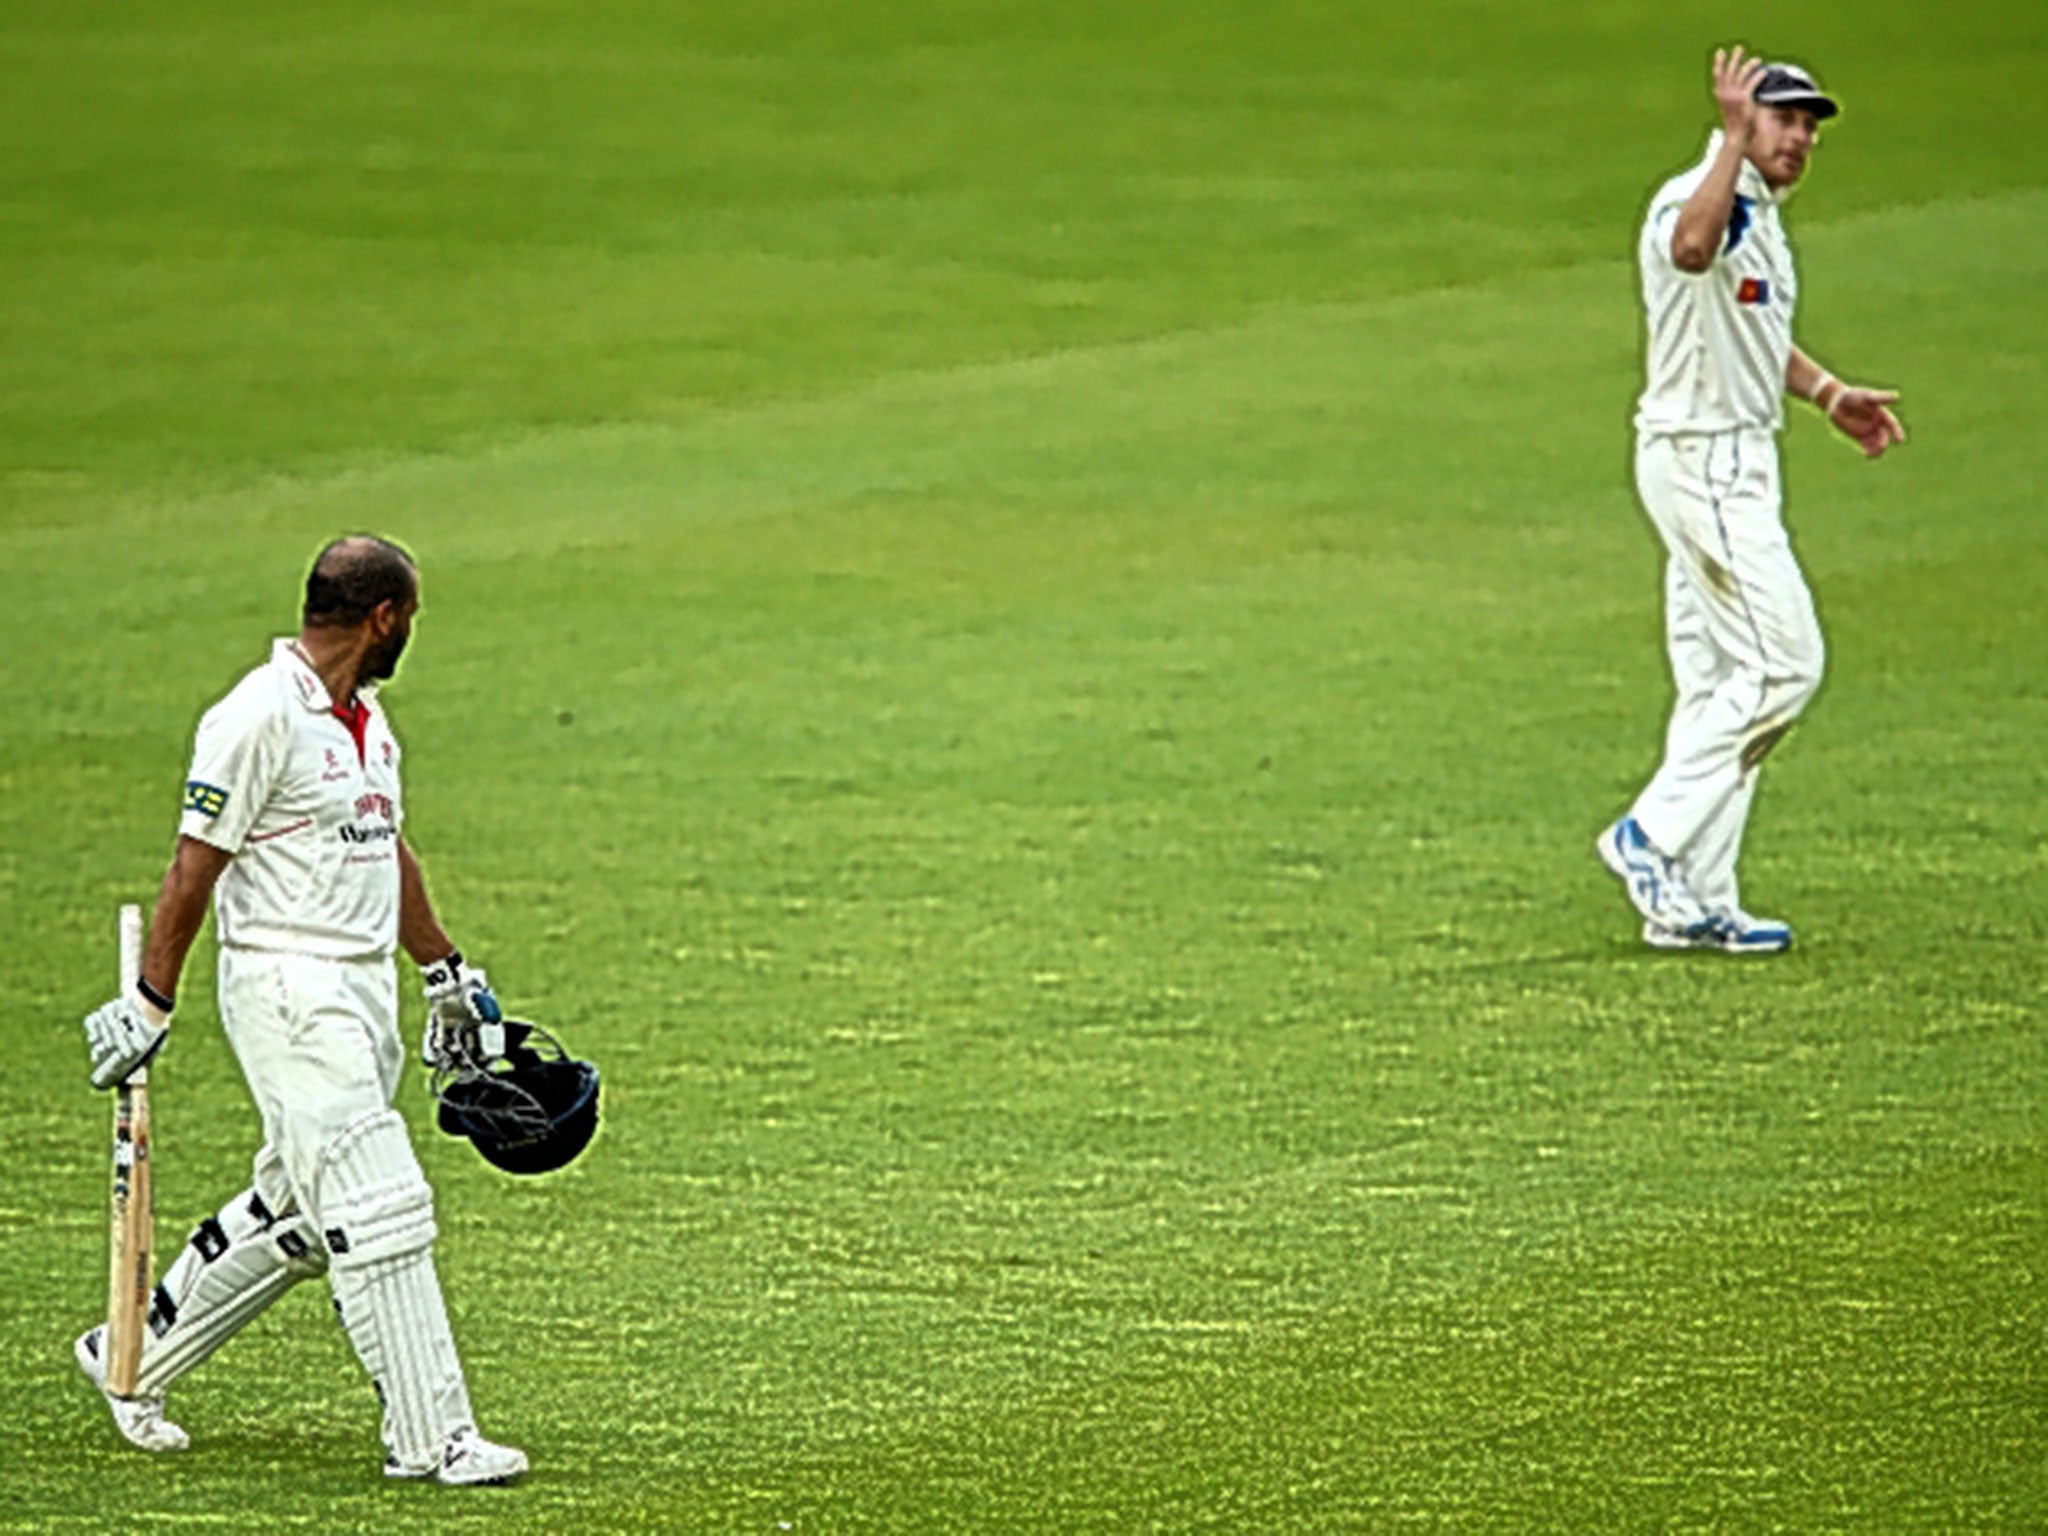 Lancashire’s Ashwell Prince (left) and Andrew Gale, of Yorkshire, clash as they leave the field at Old Trafford on 2 September